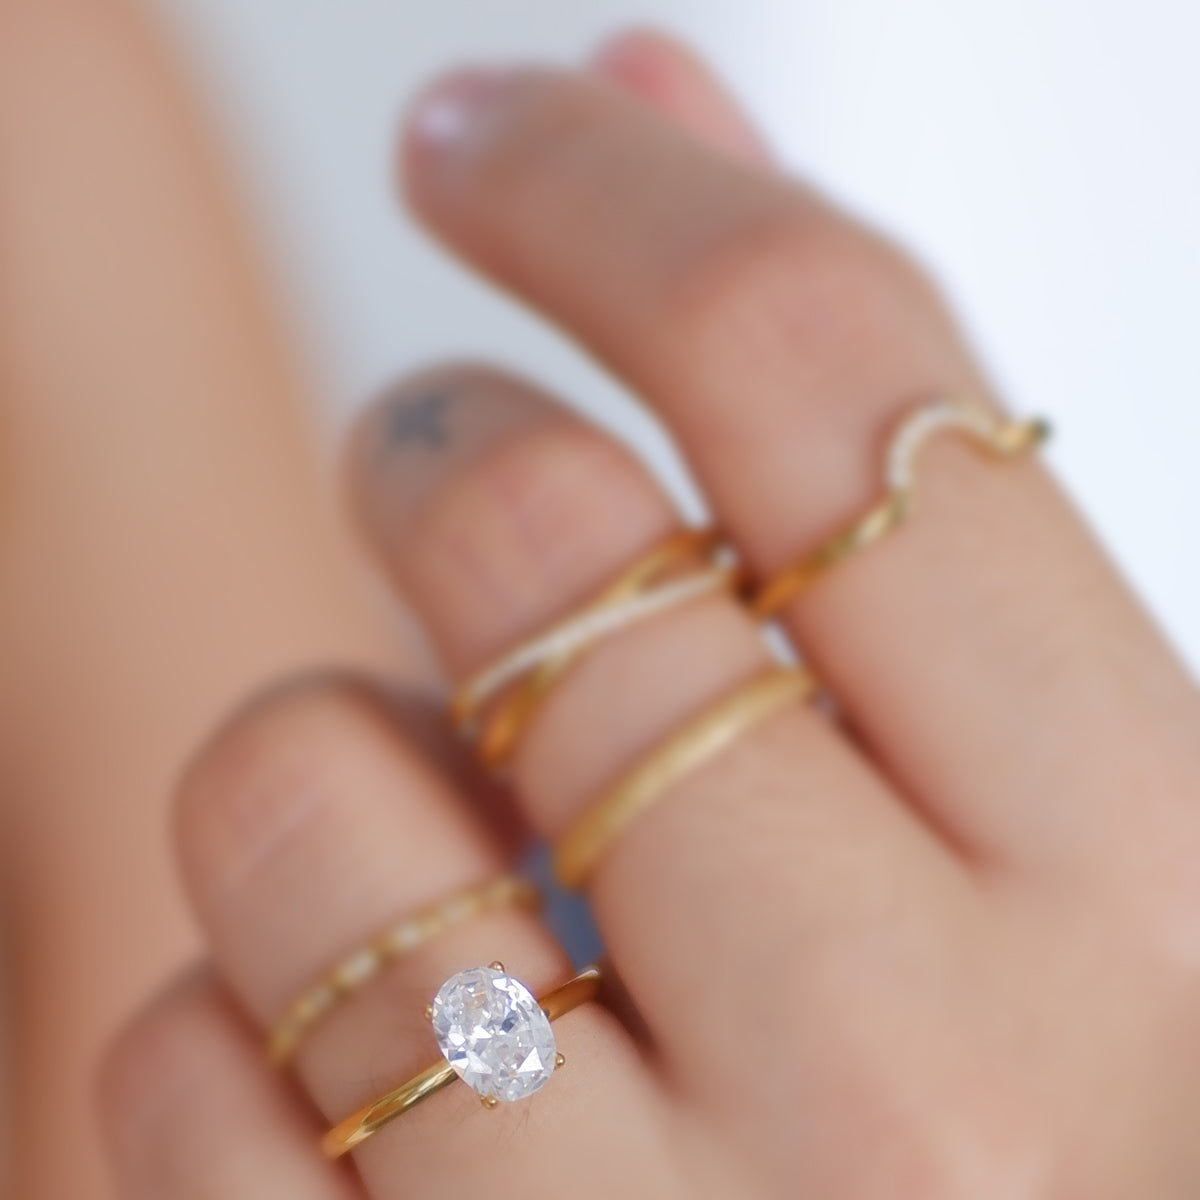 The Dream Moissanite Ring in Solid Gold